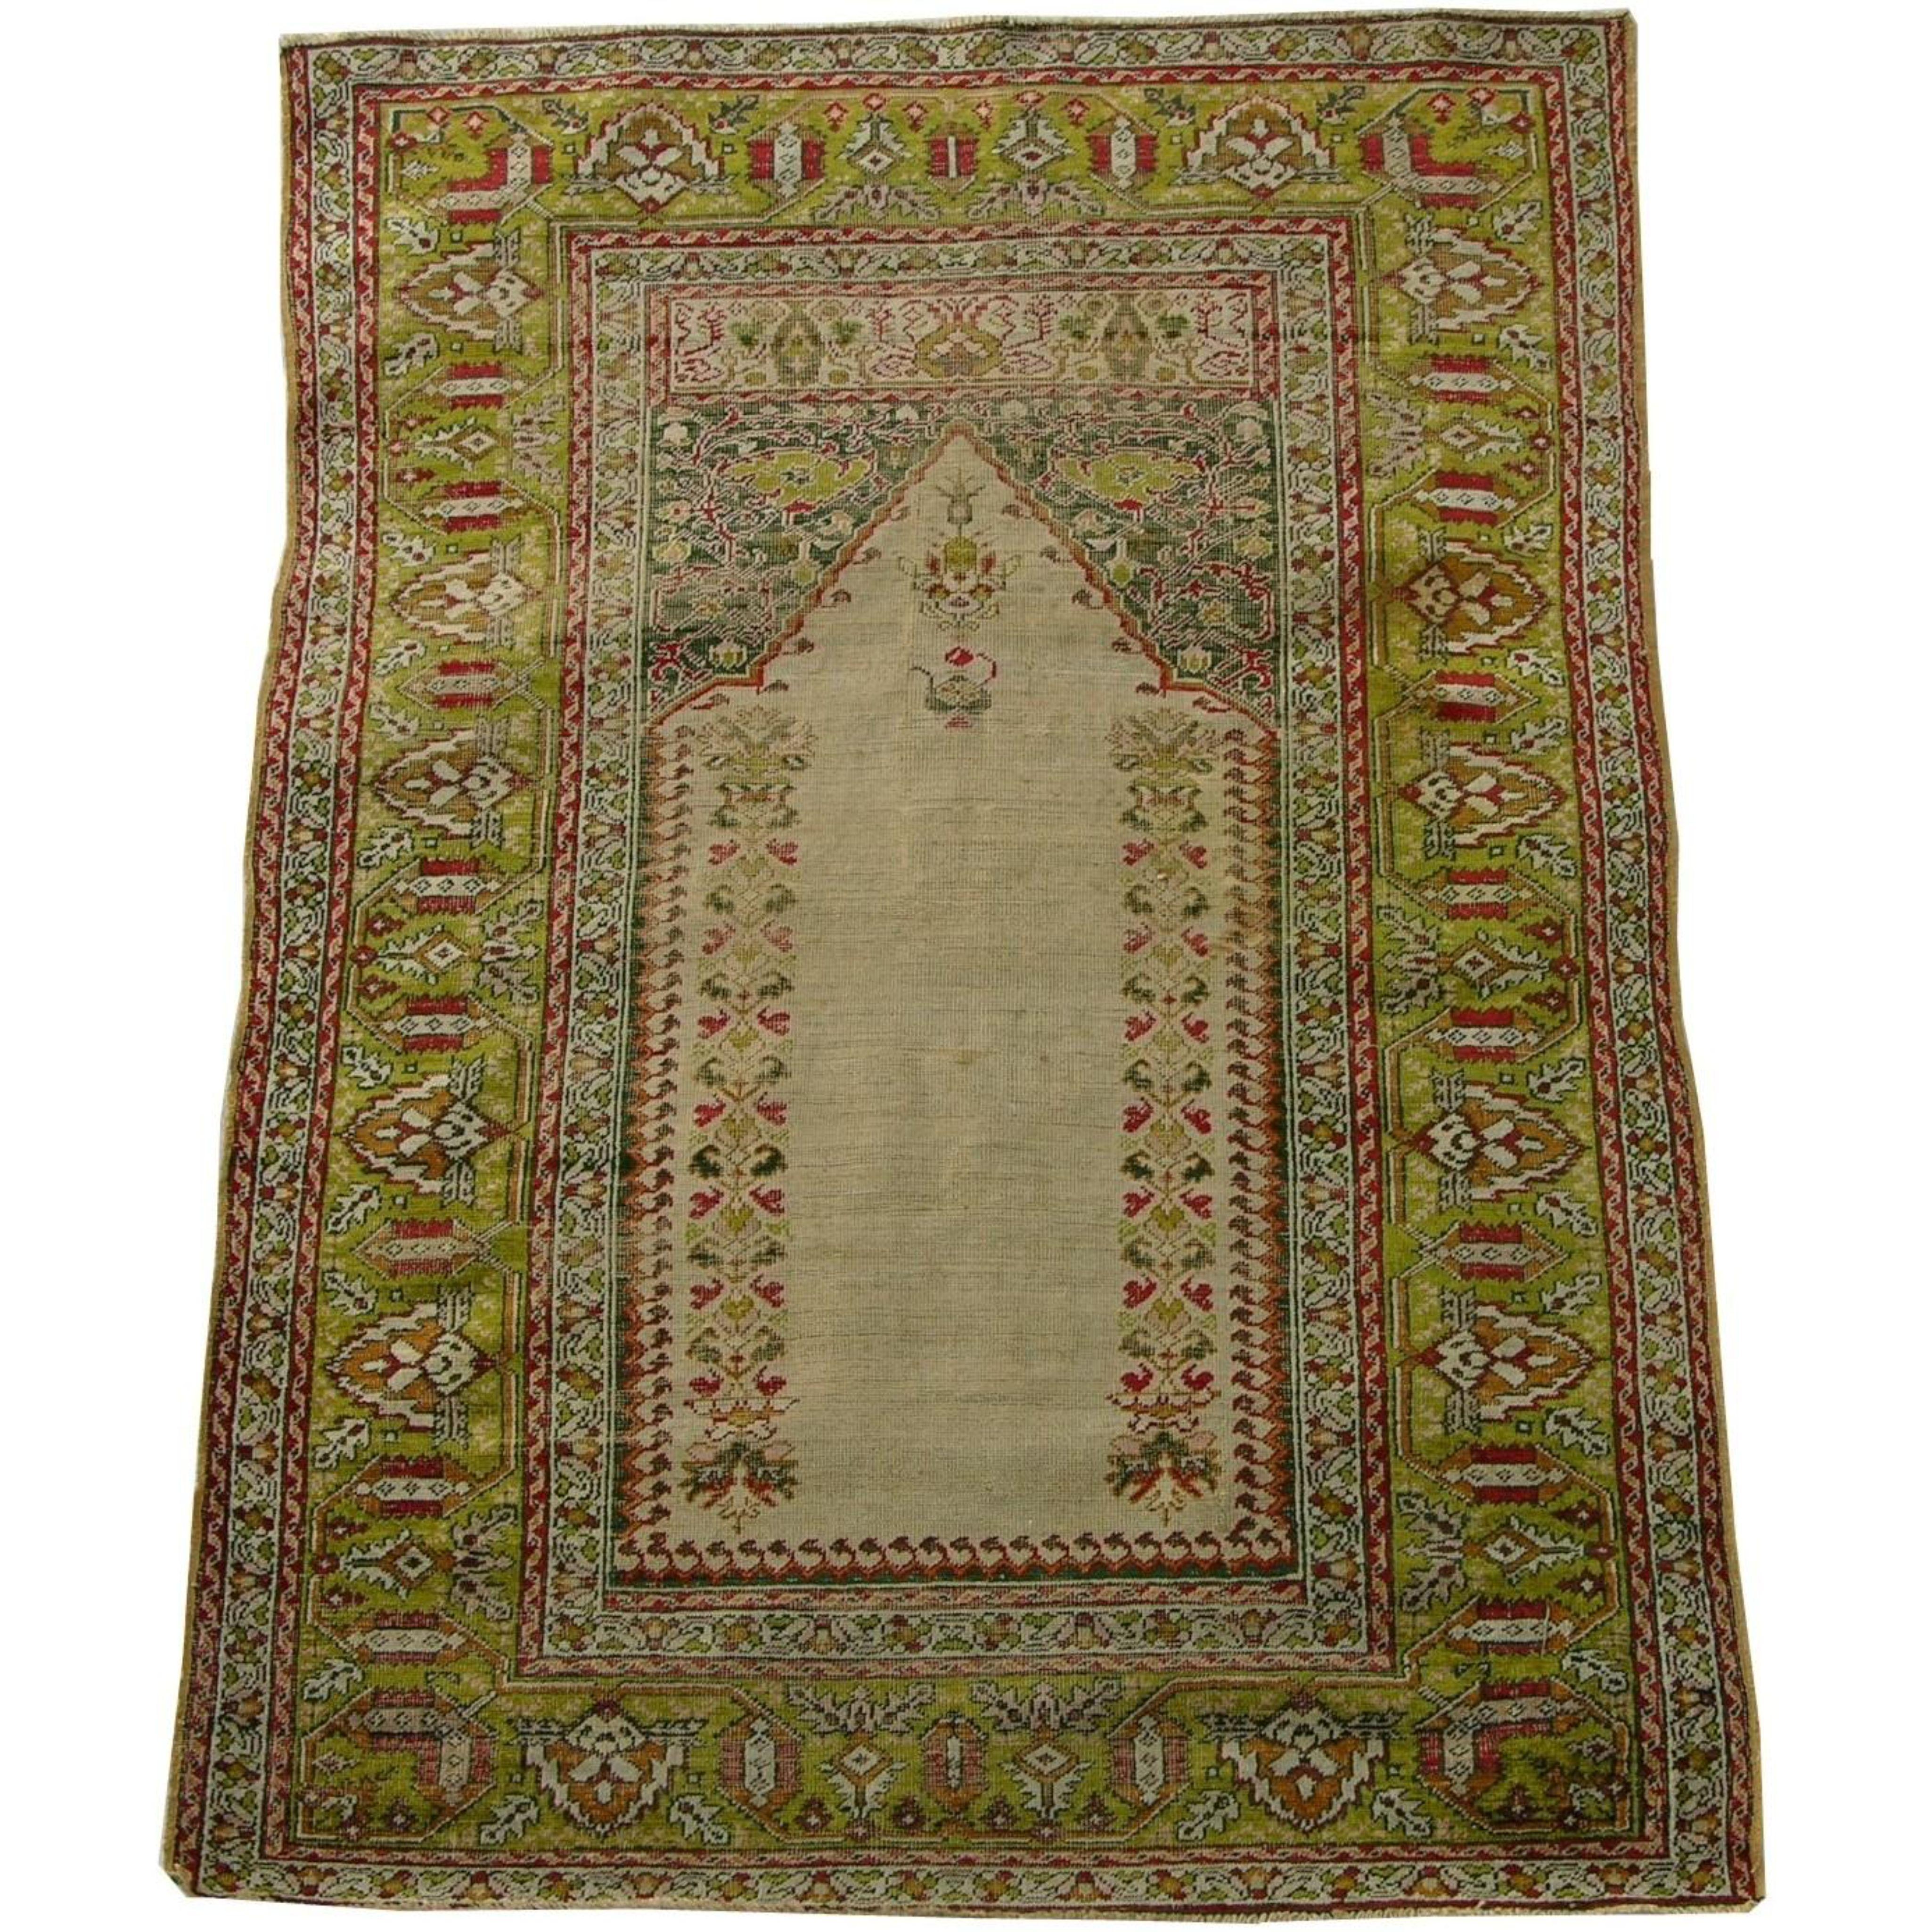 Antique Silk Turkish Rug 5.5x3.8 In Good Condition For Sale In Los Angeles, US